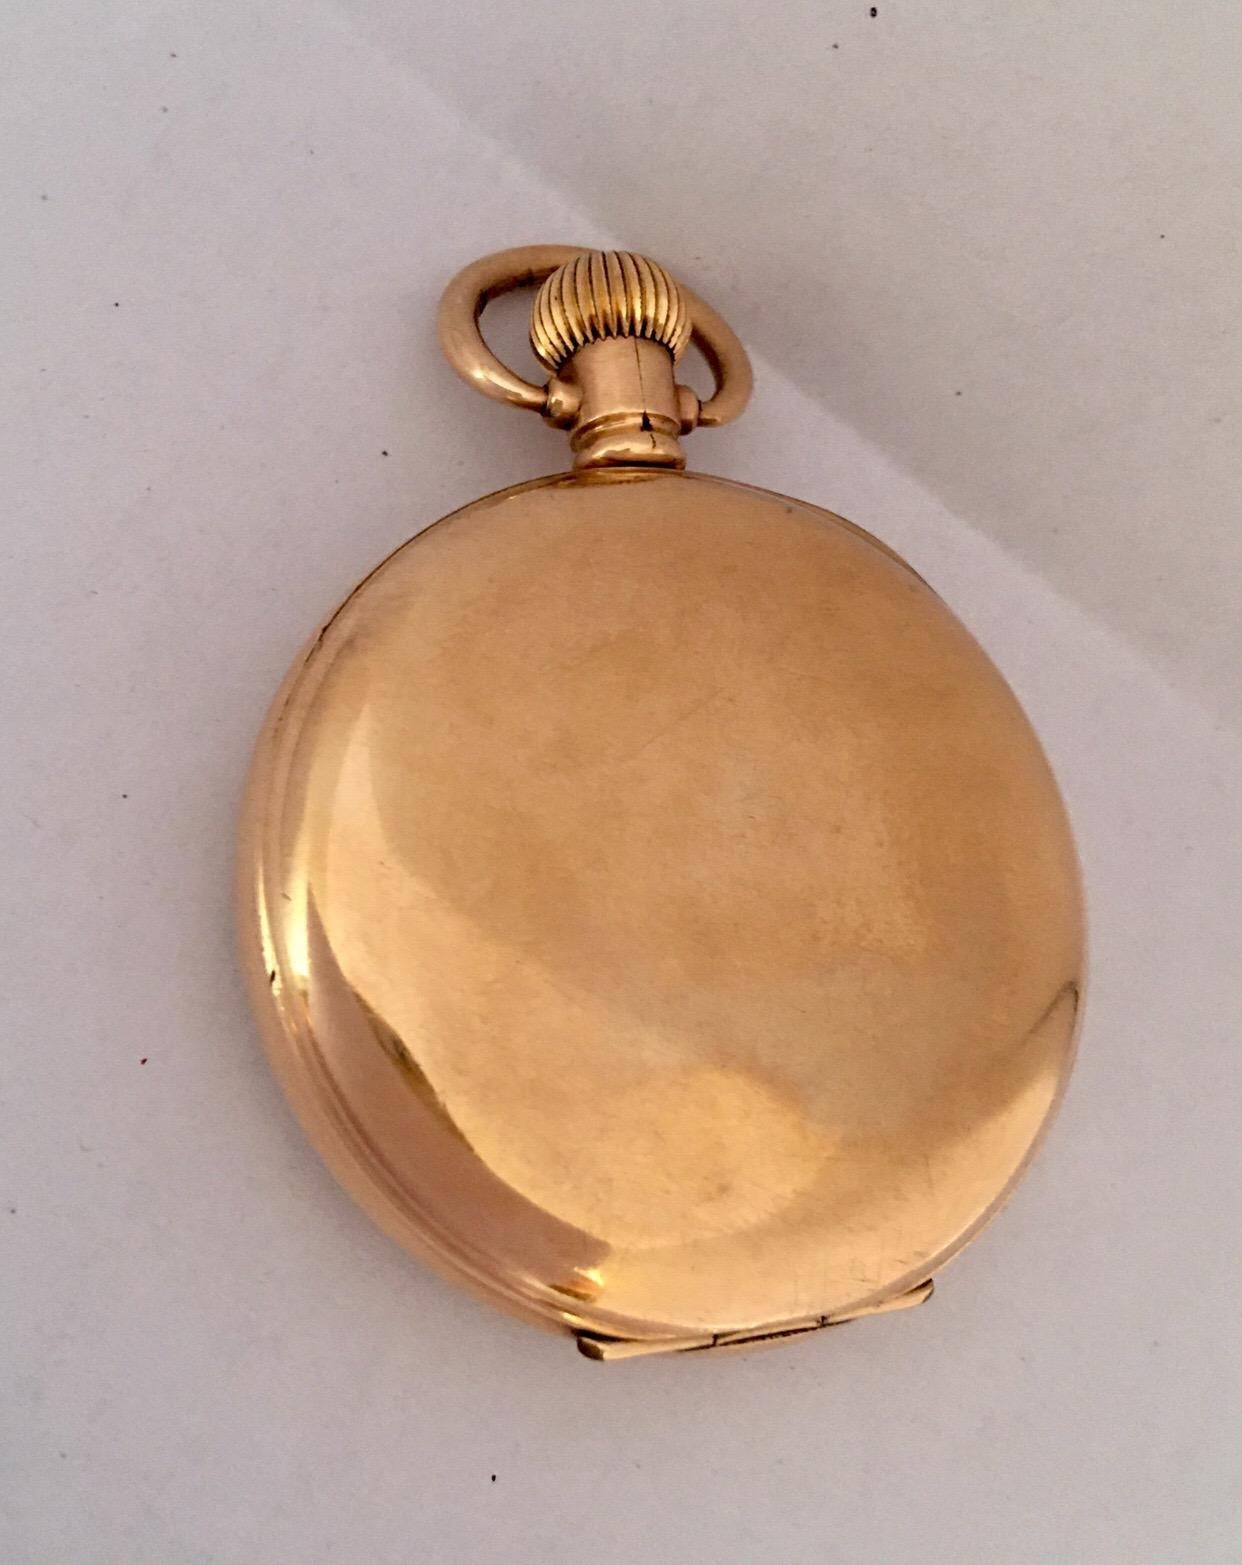 Swiss gold plated lever pocket watch, the movement branded Northern Goldsmiths Co. Newcastle with compensated balance and regulator, the dial branded Northern Goldsmiths Co. Newcastle, Admiralty, with Roman numerals, minute track and subsidiary